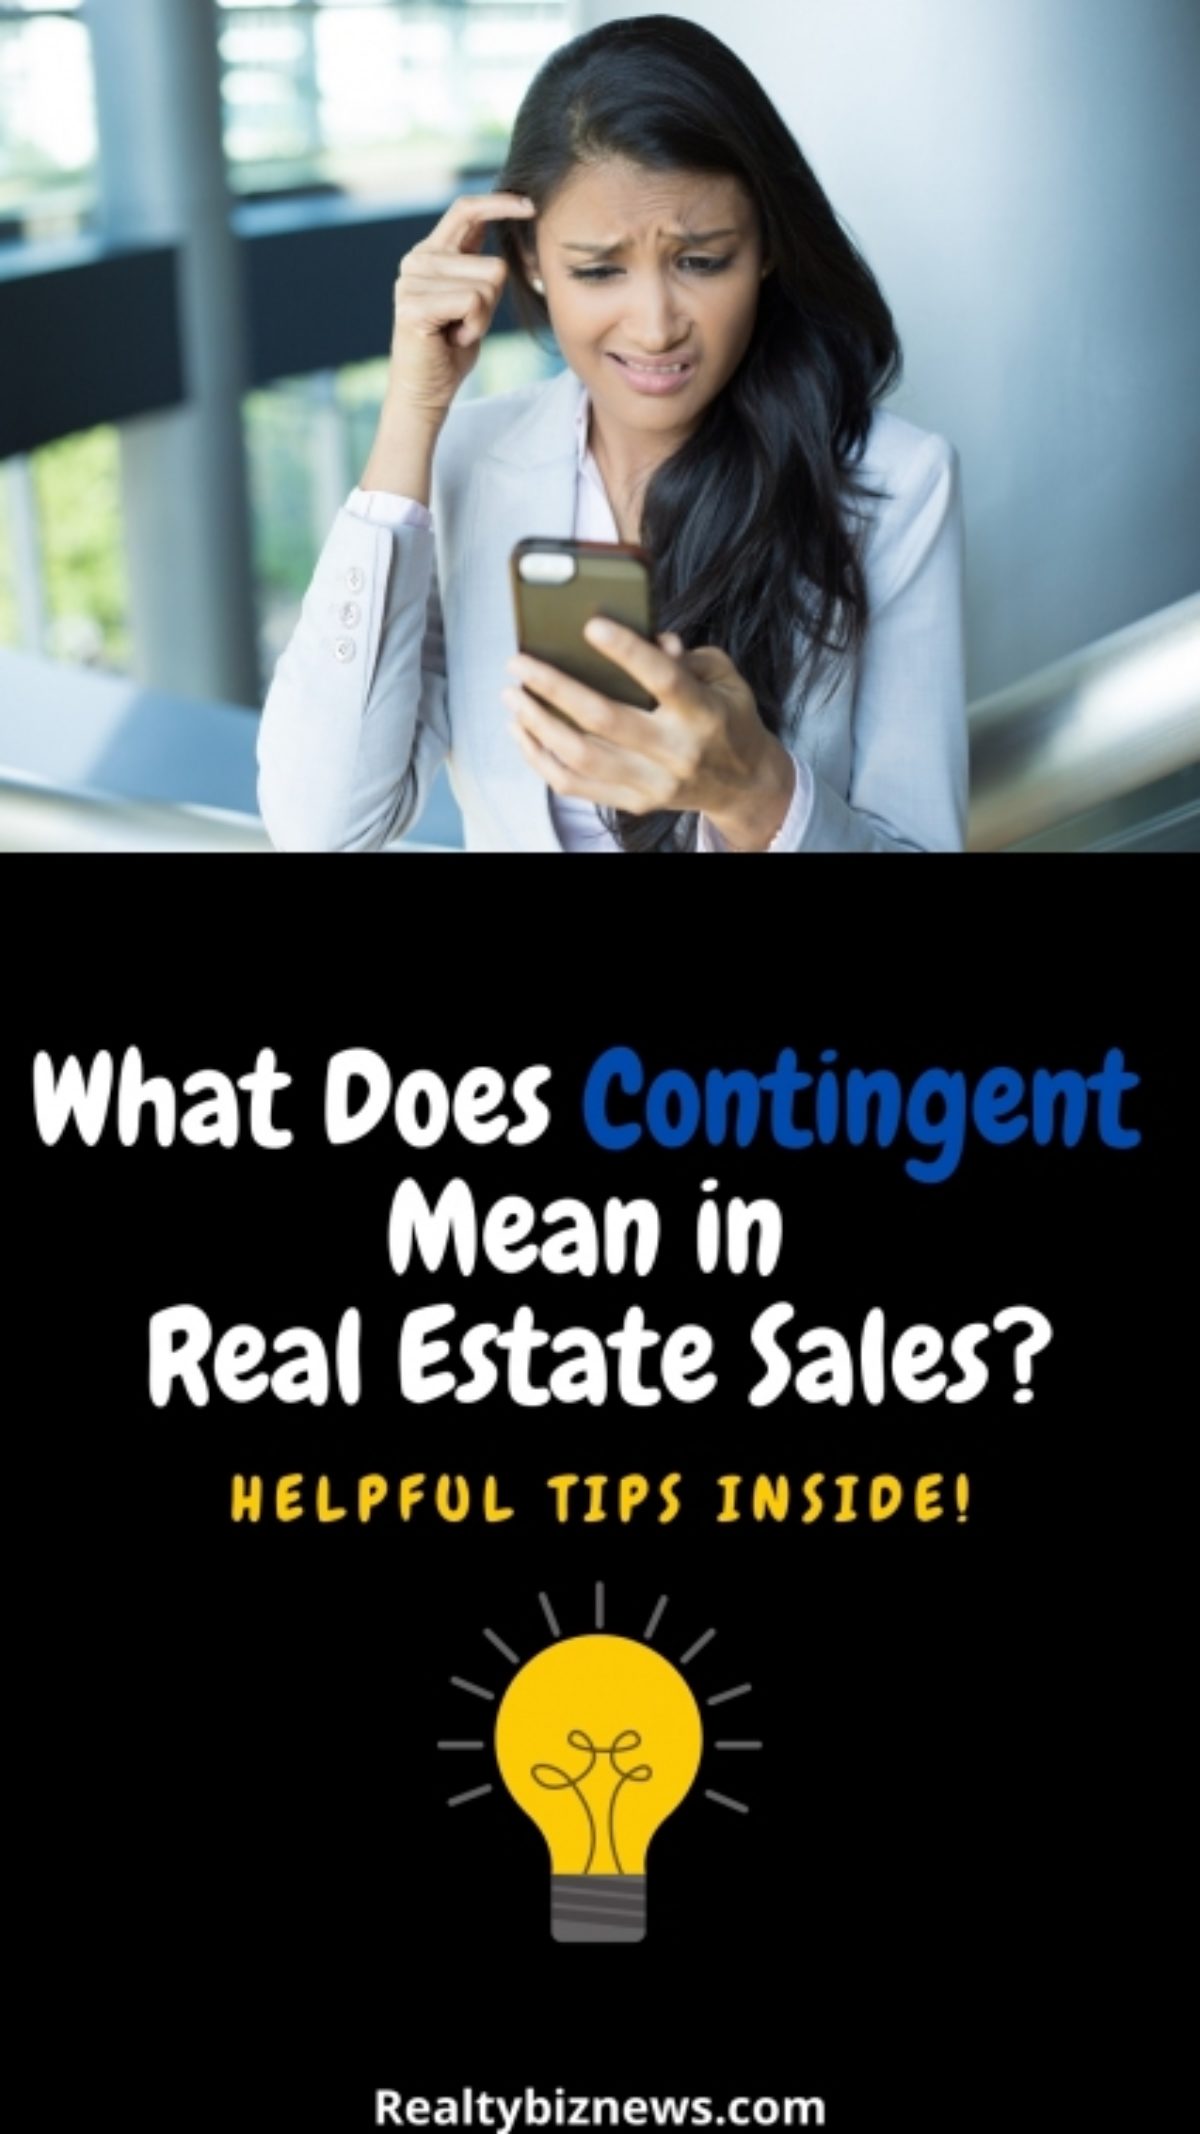 Contingent: What It Means In Real Estate